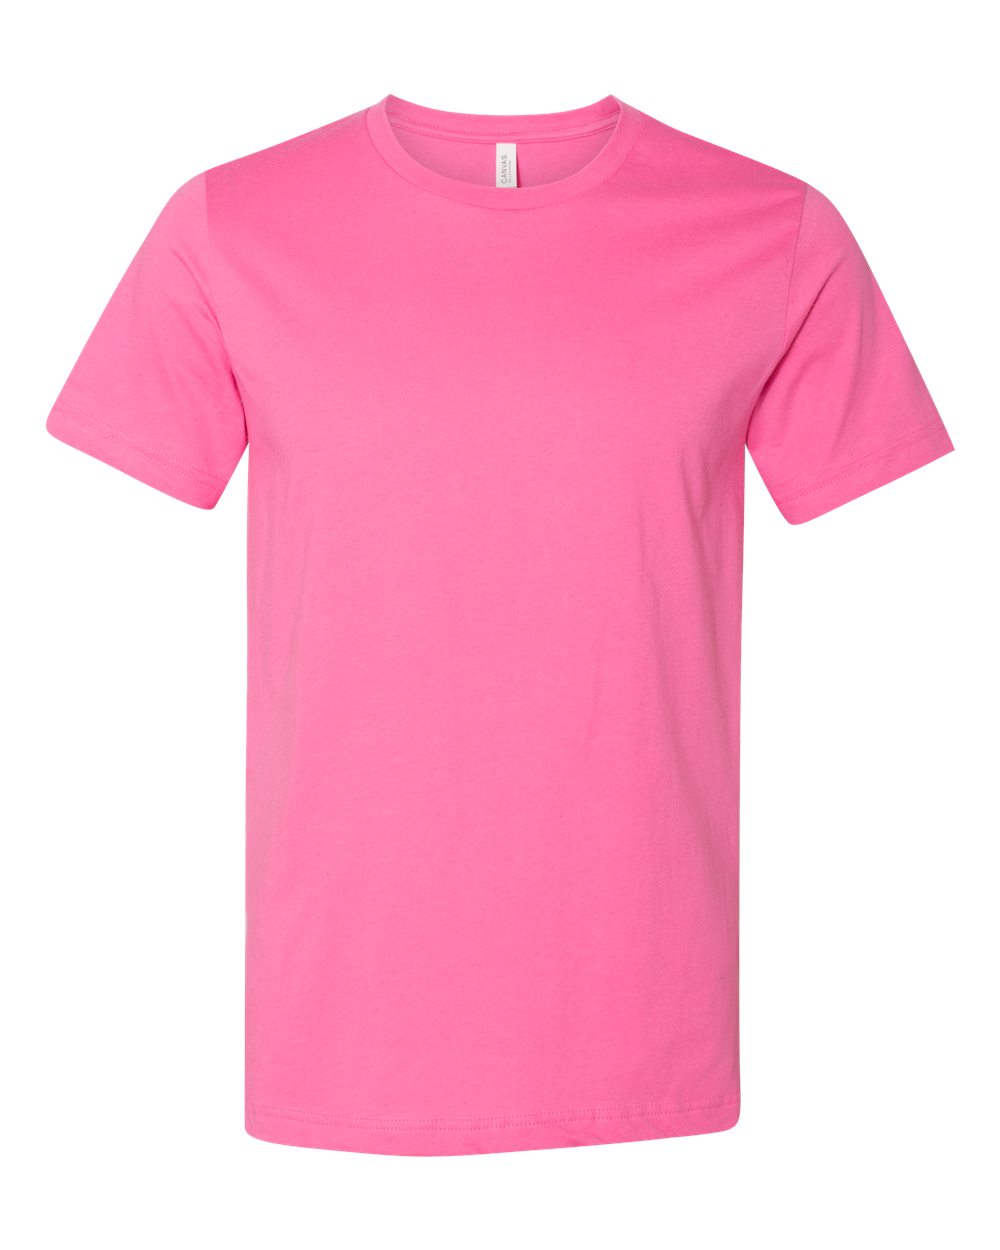 Charity Pink - Bella Canvas T-Shirt – The Vinyl Stand